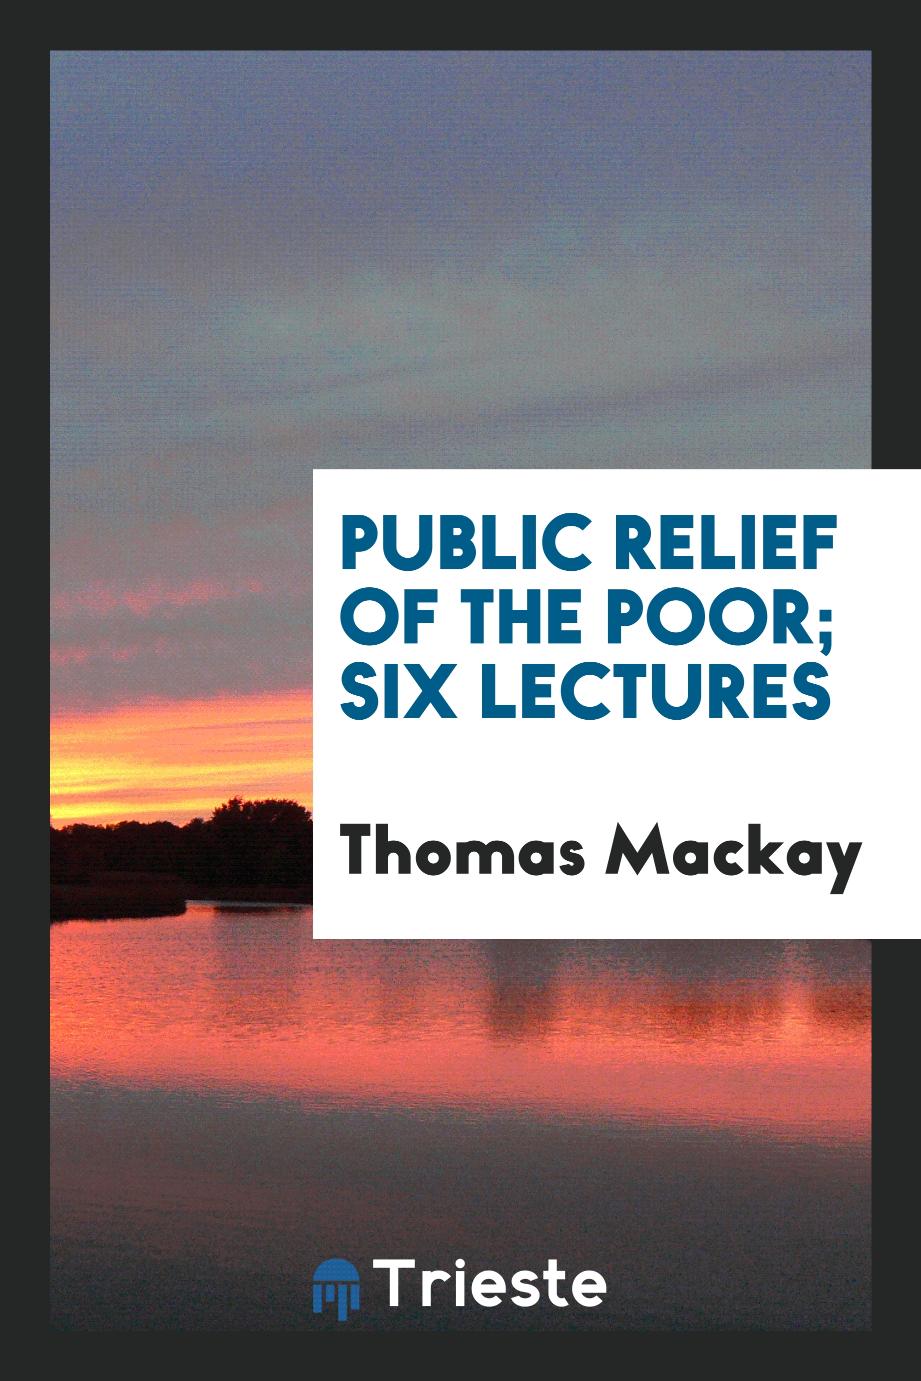 Public relief of the poor; Six lectures